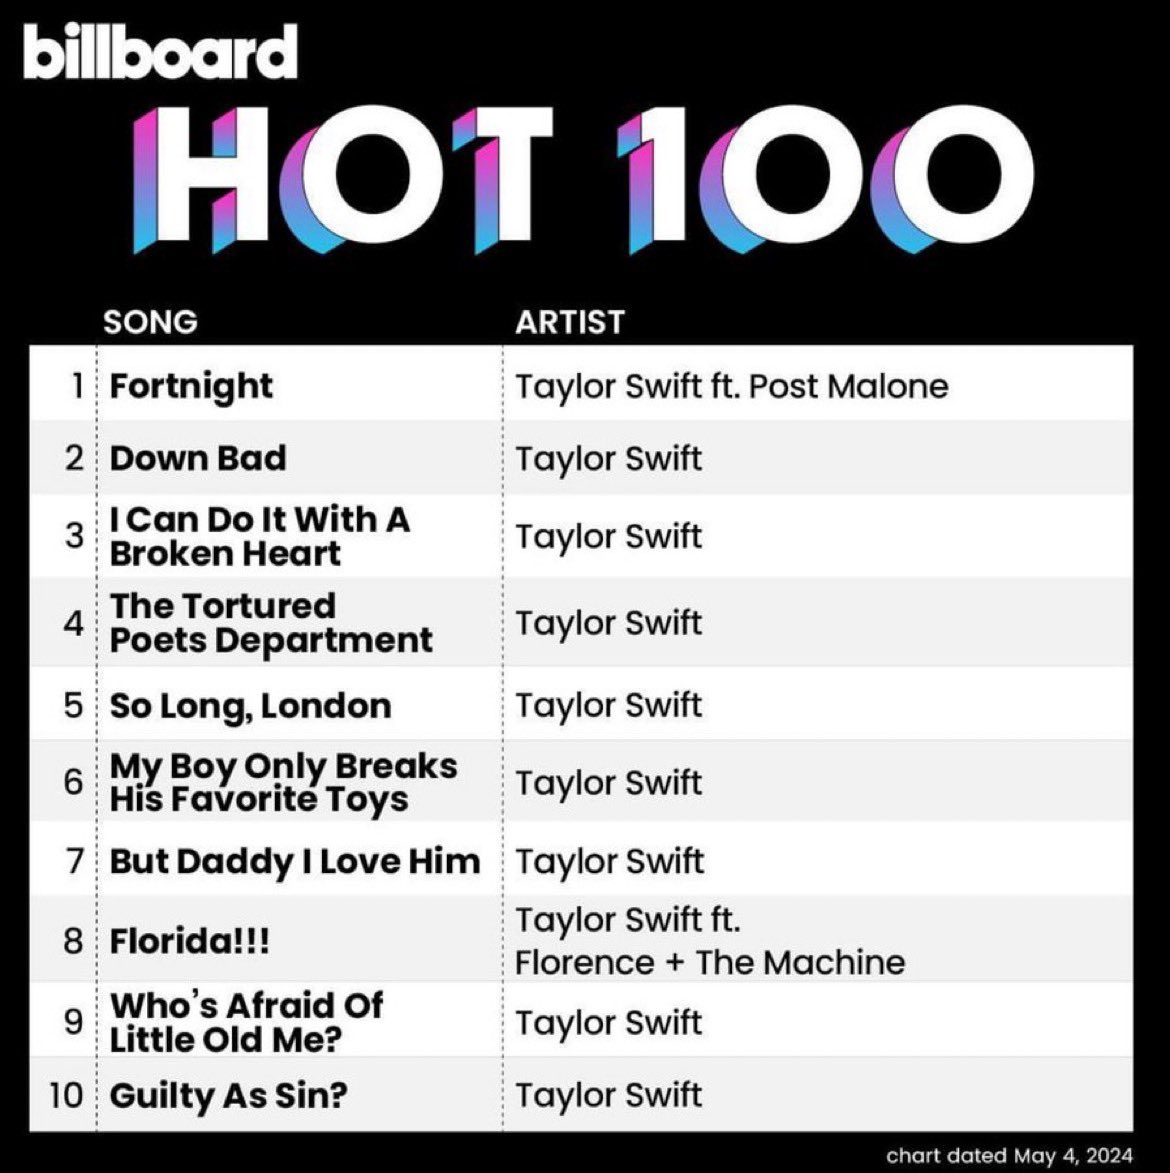 no other artist has occupied the whole top 10 on billboard hot 100, and taylor swift just did it for the second time. THE MUSIC INDUSTRY